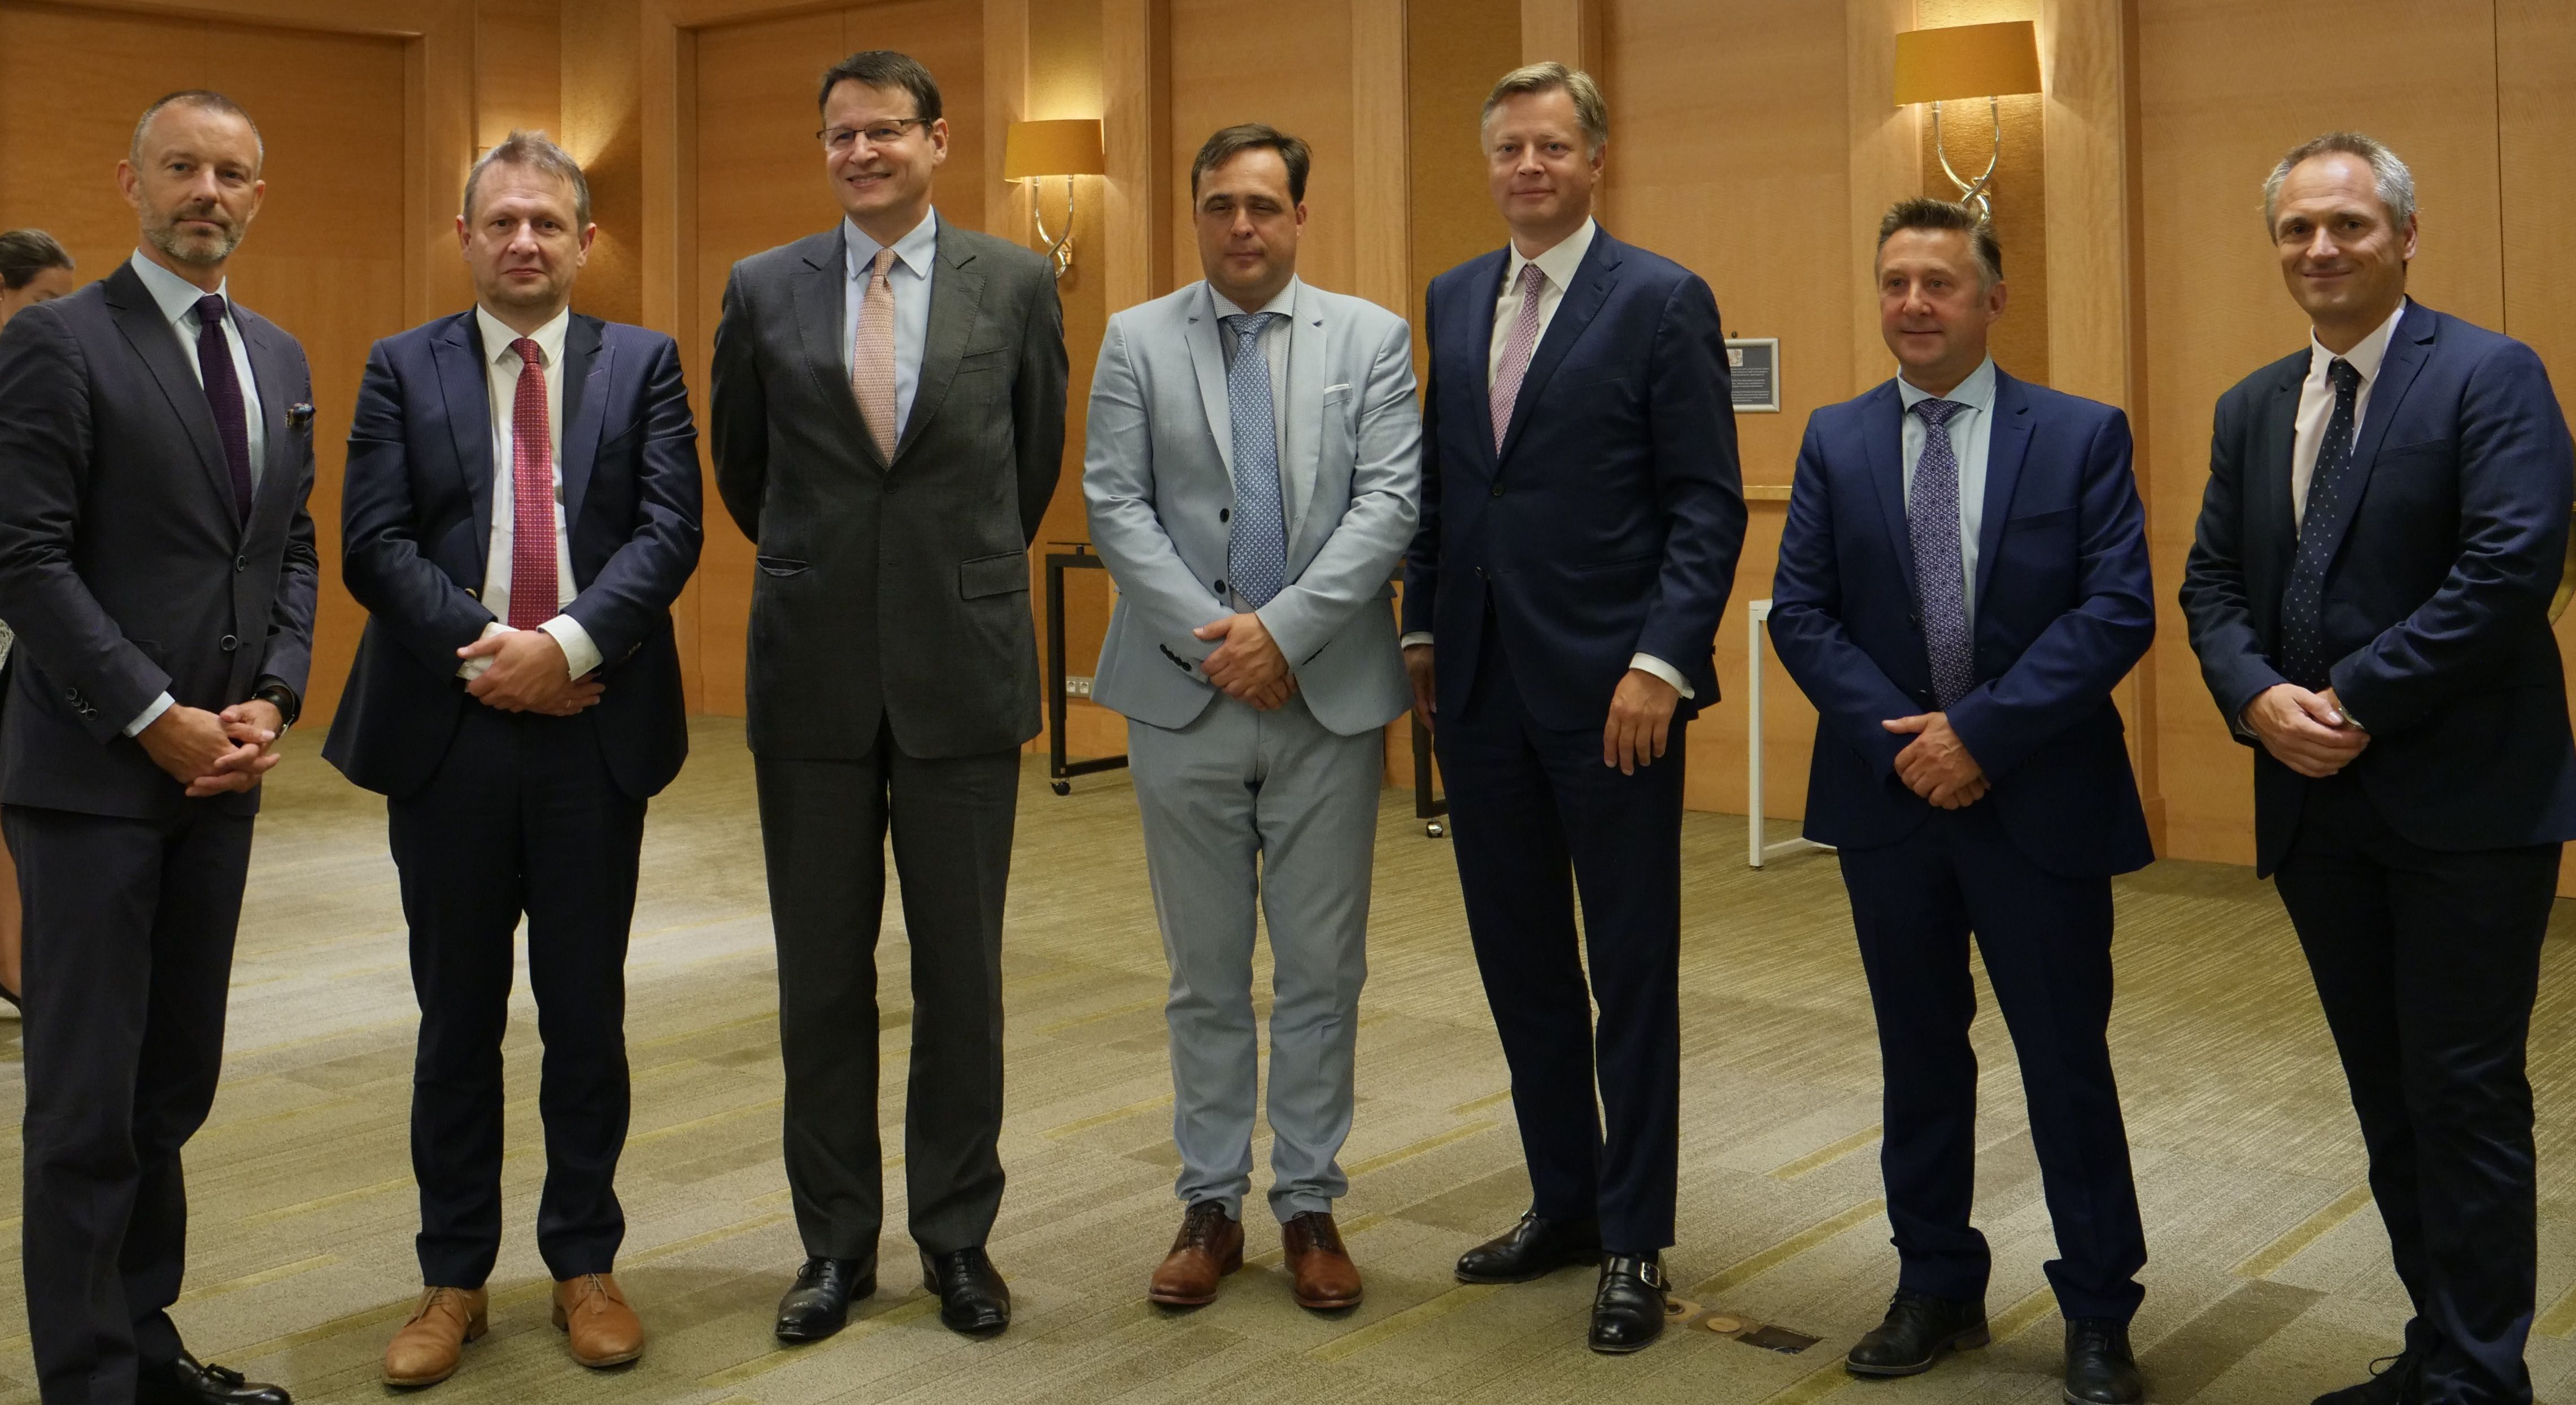 CEM partners (from the left to the right): ACI Europe, Belgocontrol, EUROCONTROL, TUI Fly Benelux, Brussels Airport Company, DHL Aviation and Brussels Airlines